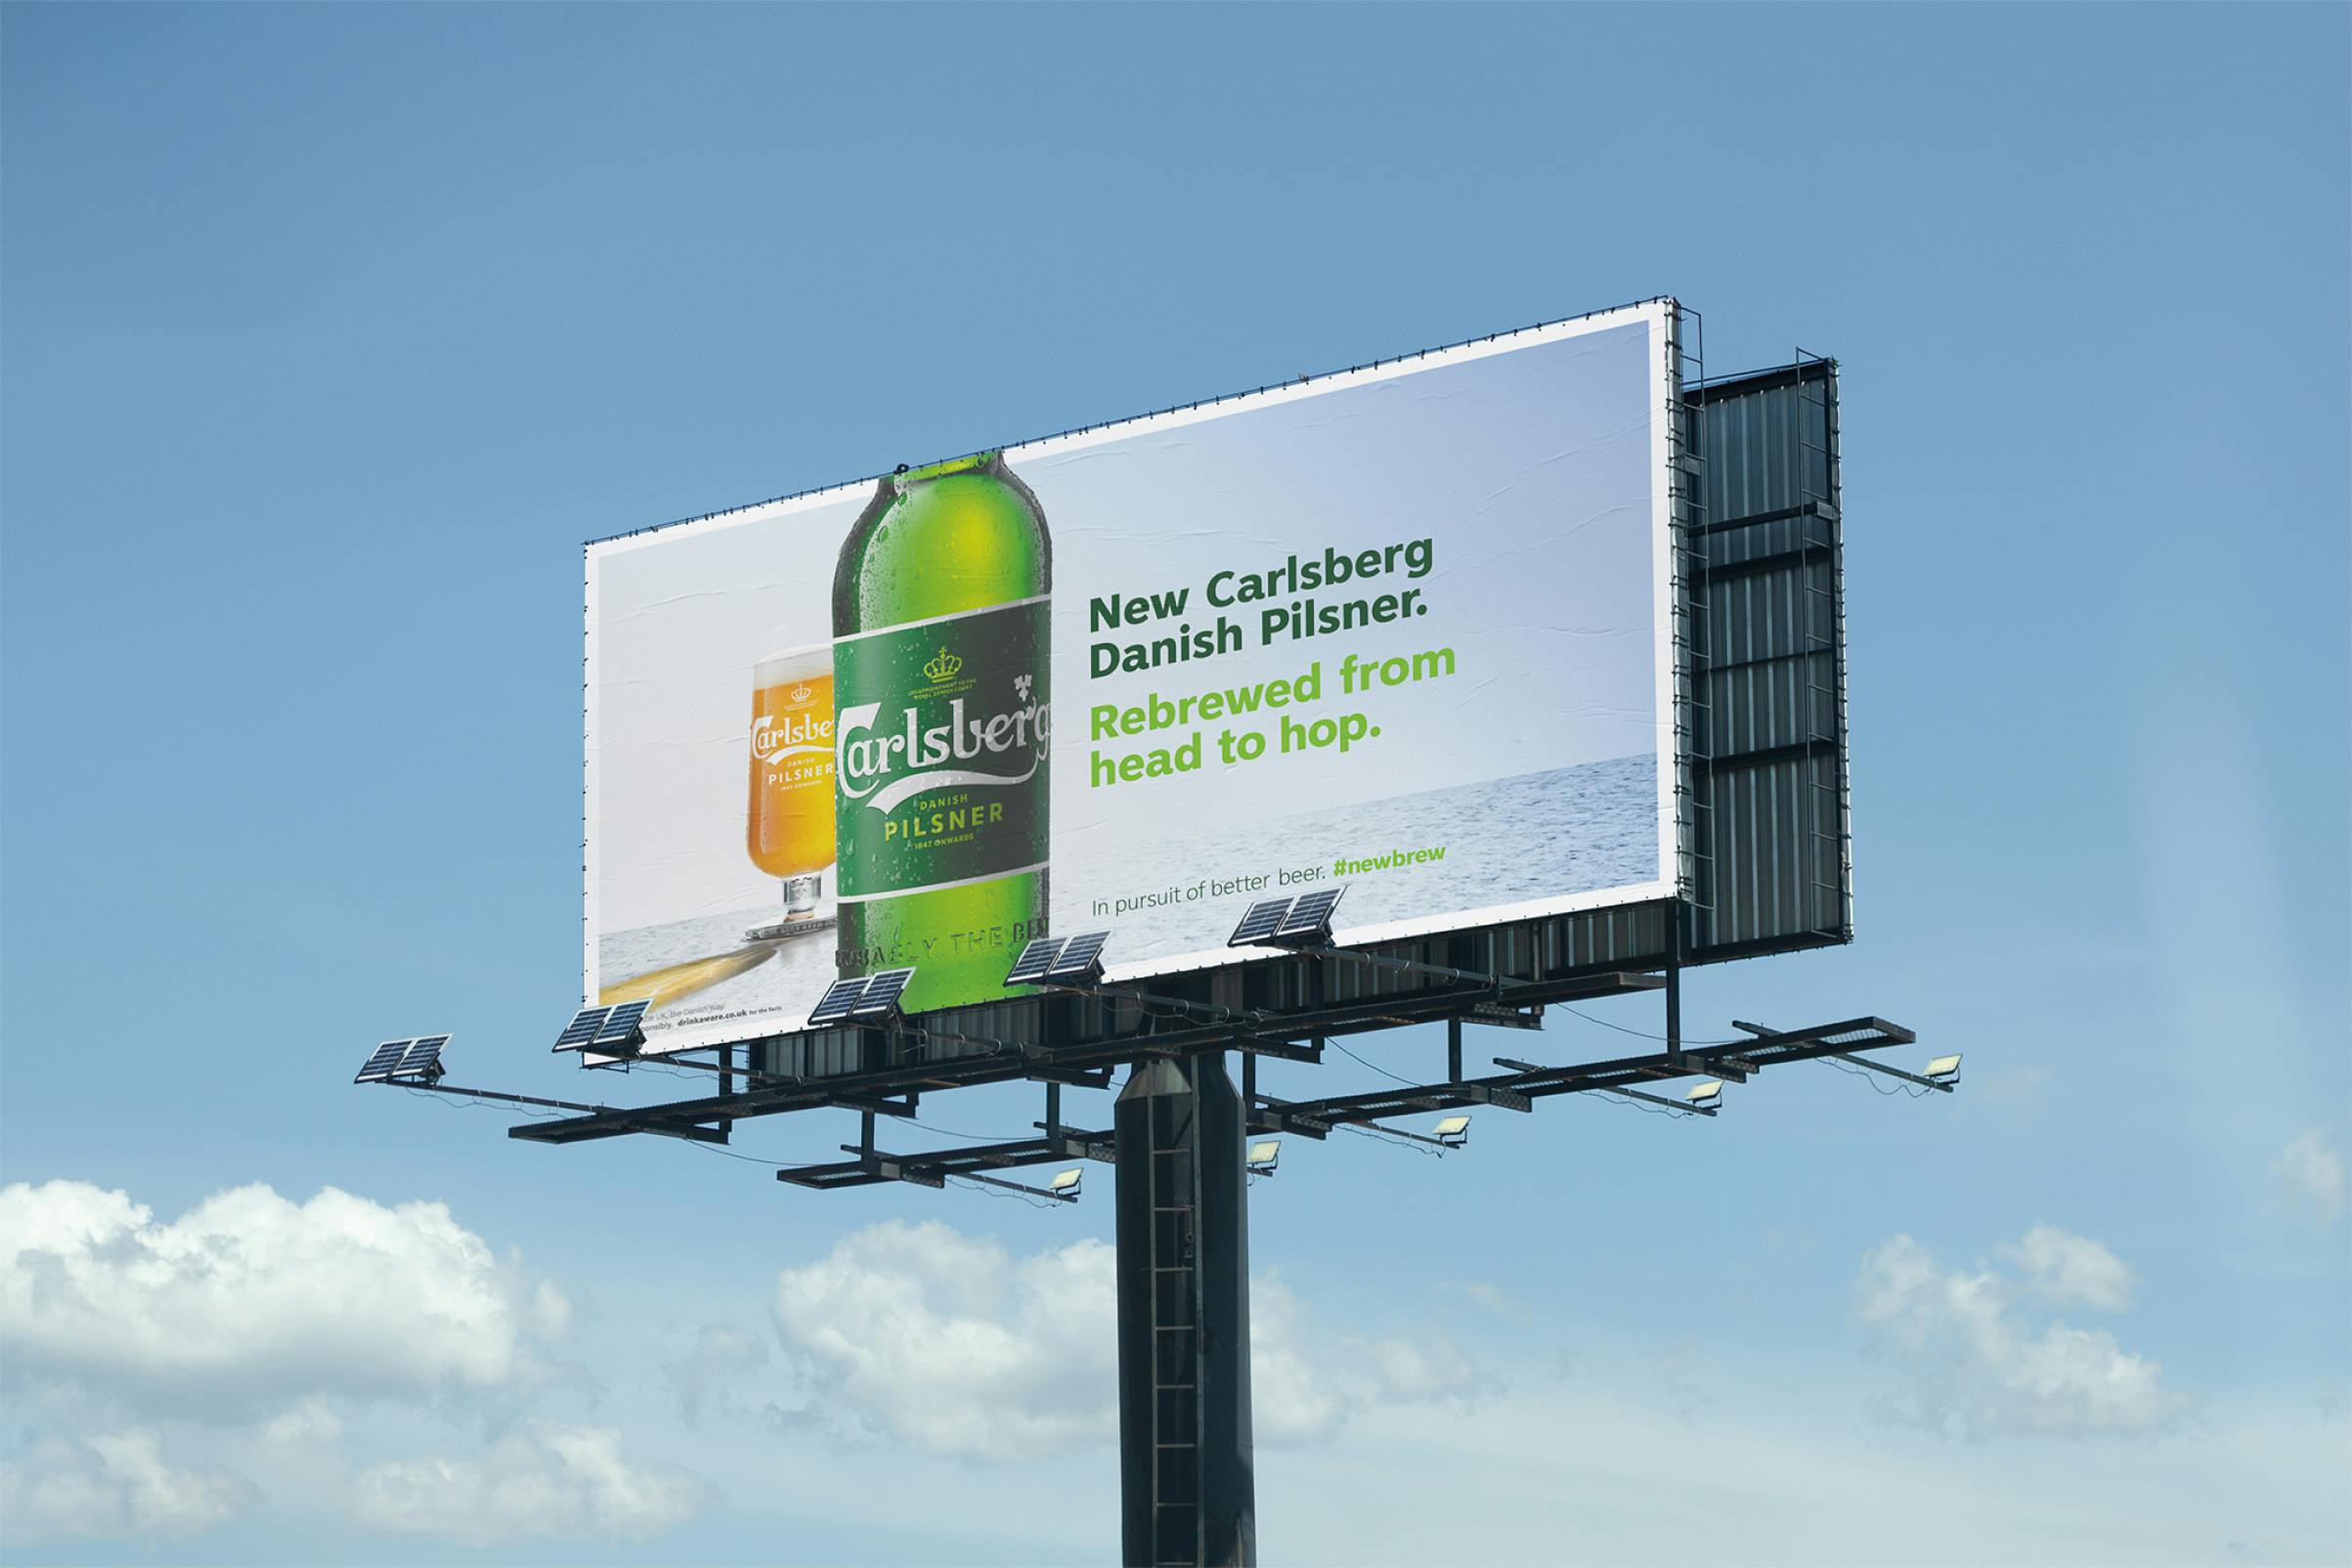 Carlsberg Probably Not Poster Campaign on Billboard